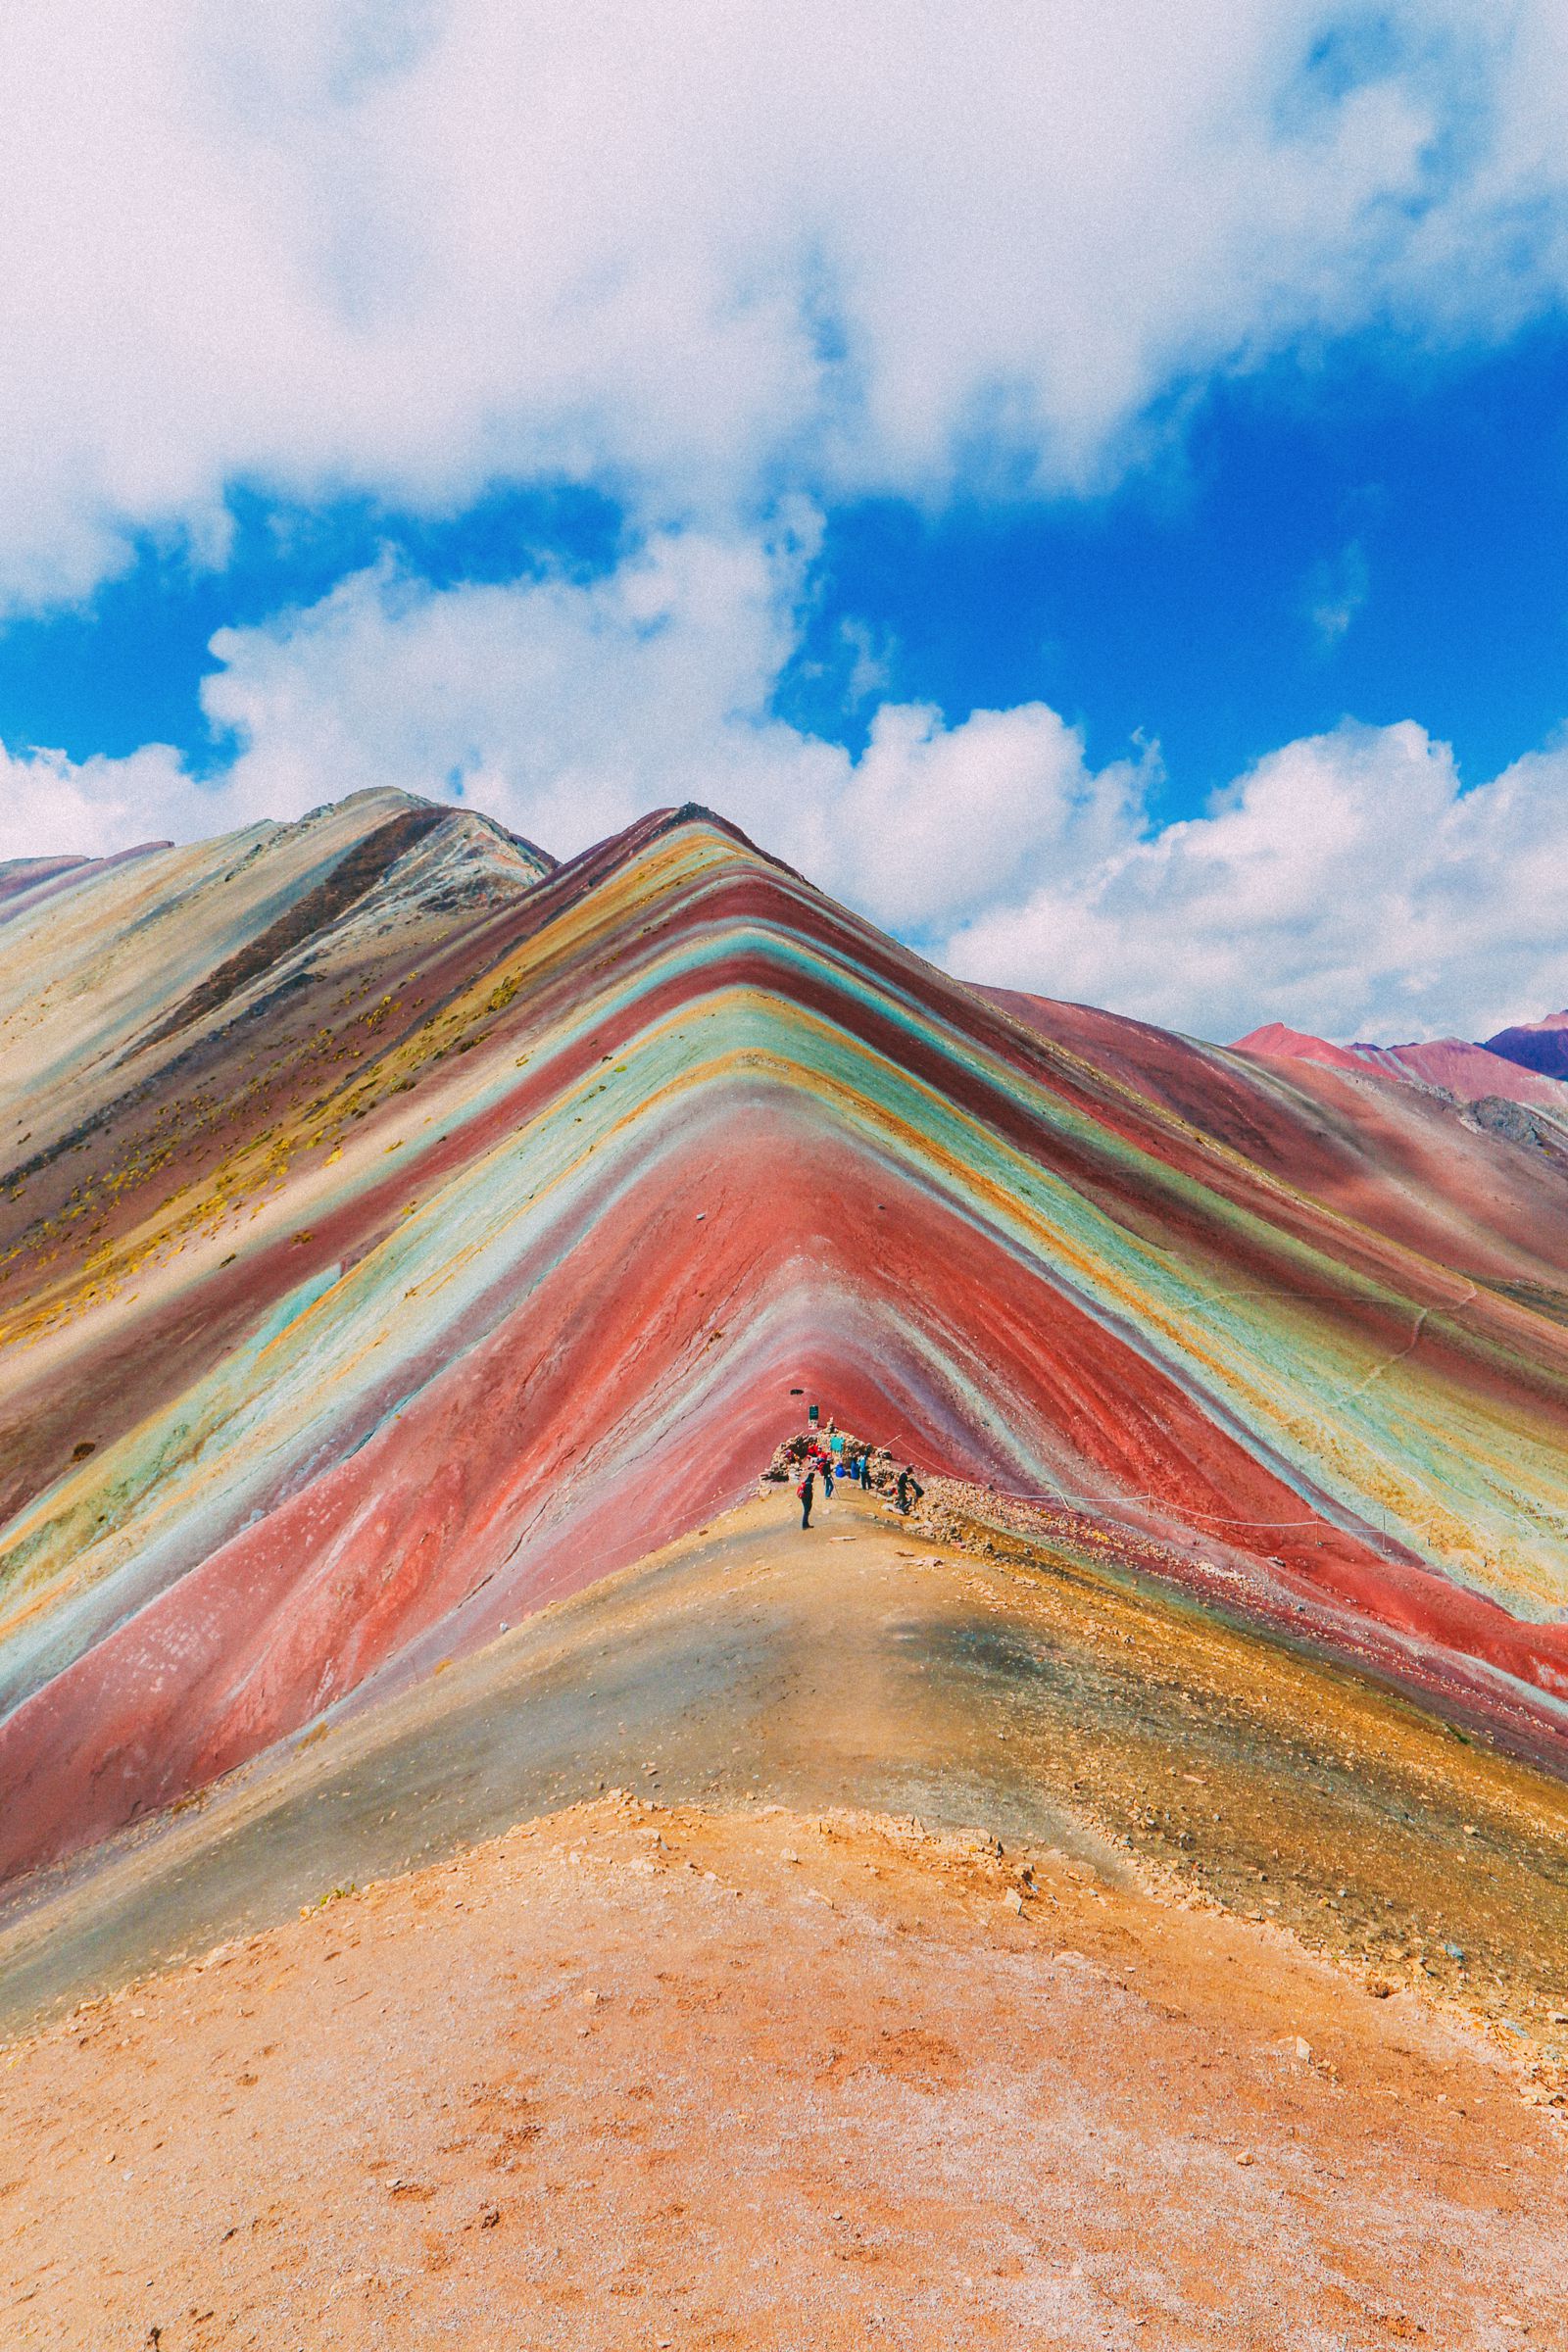 How To Visit Rainbow Mountain In Peru - Your Essential Guide - Hand